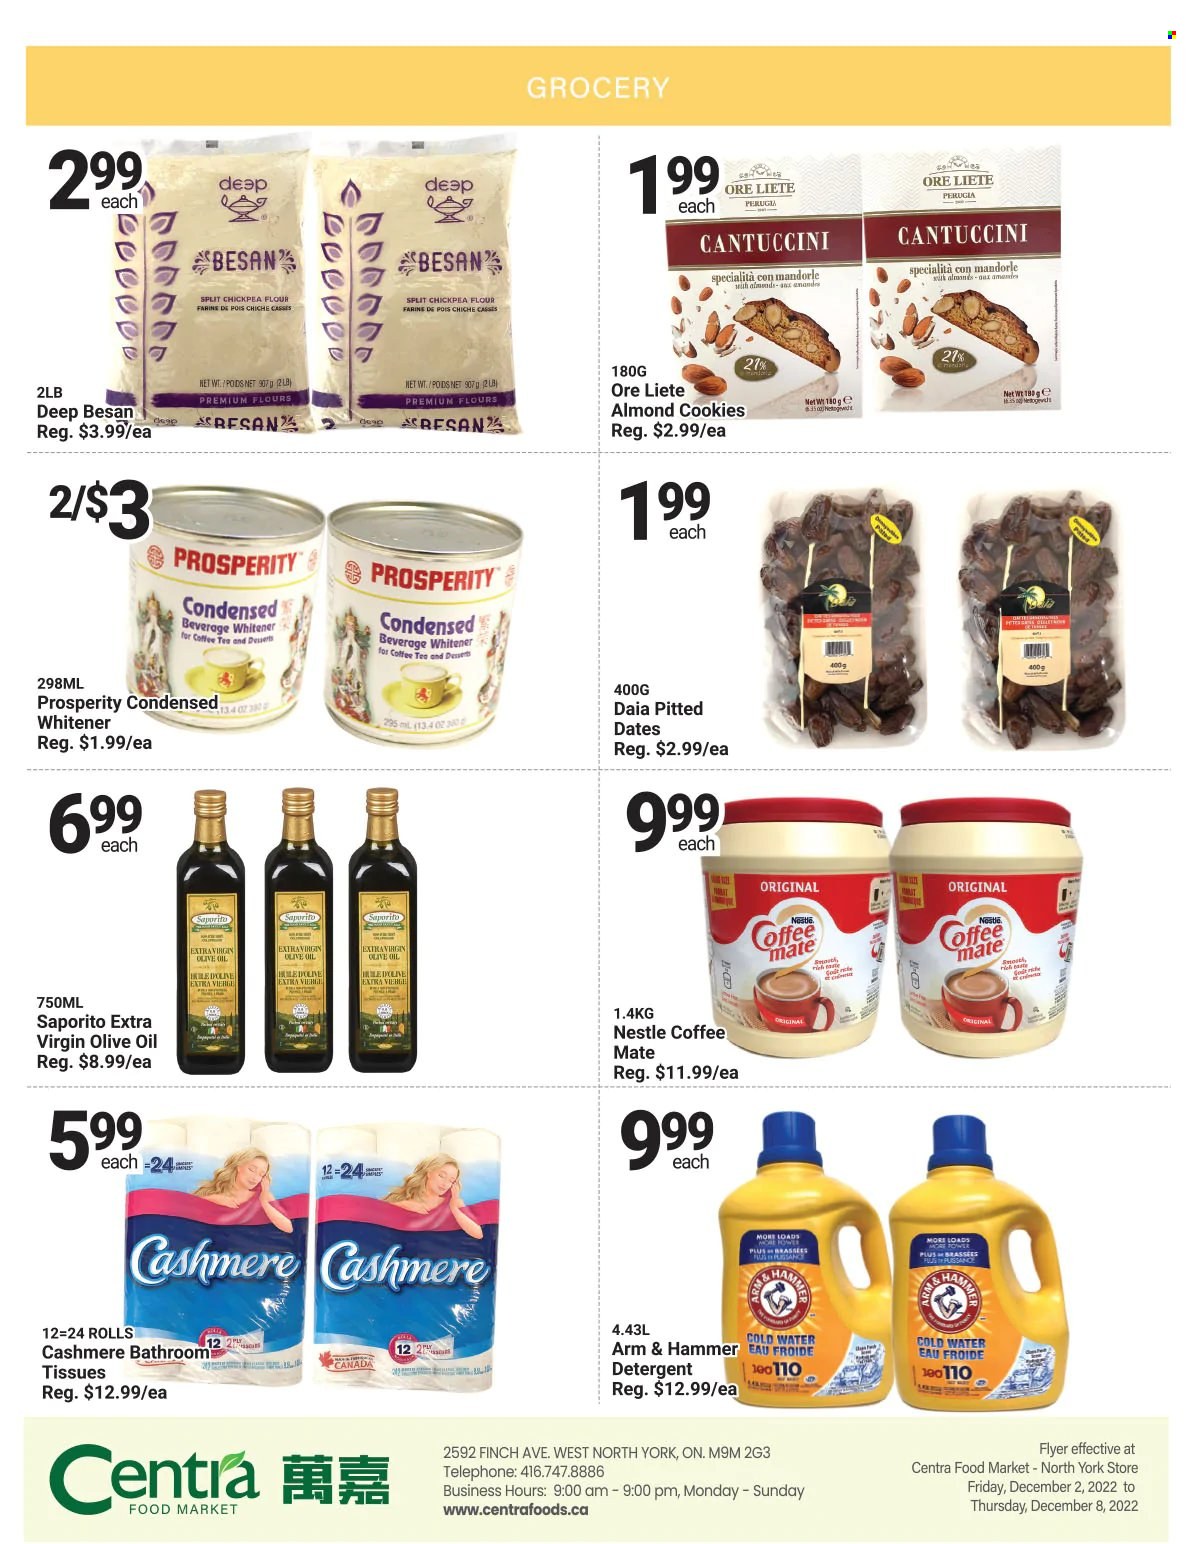 thumbnail - Centra Food Market Flyer - December 02, 2022 - December 08, 2022 - Sales products - Coffee-Mate, cookies, ARM & HAMMER, flour, gram flour, extra virgin olive oil, olive oil, oil, dried fruit, dried dates, toilet paper, tissues, detergent, Nestlé. Page 4.